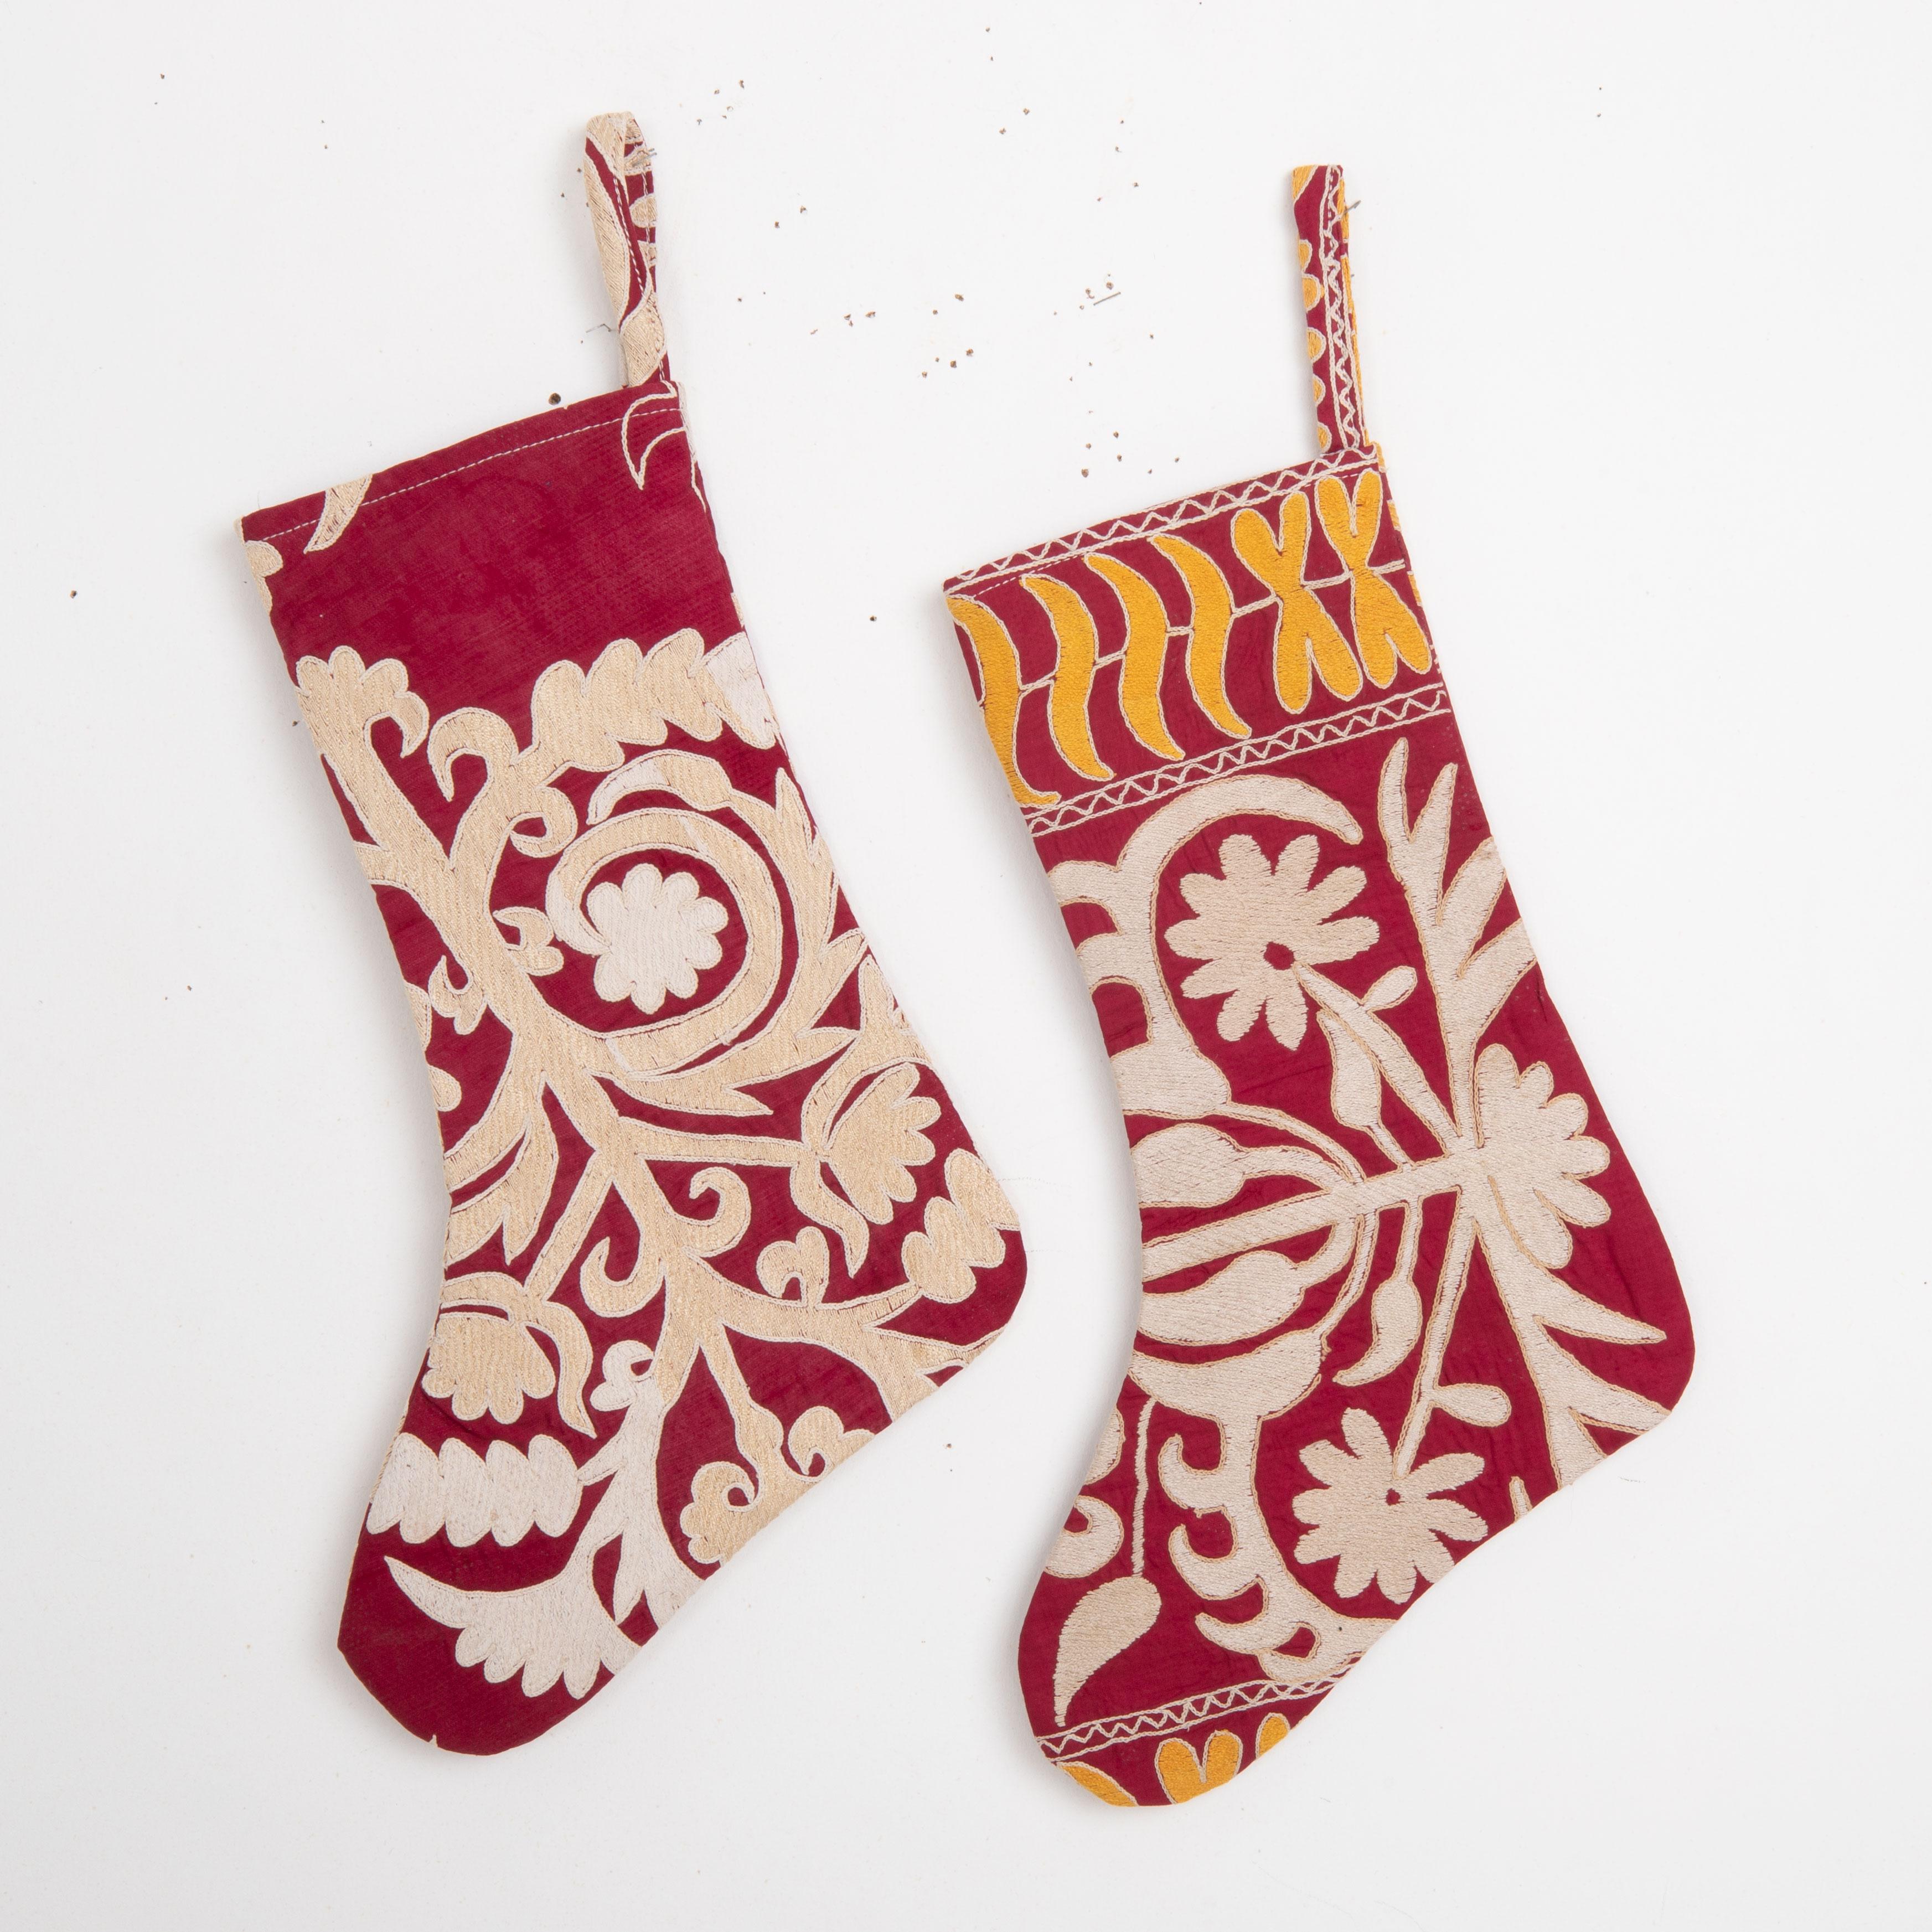 
These Christmas Stockings were made from mid 20th C. Uzbek Suzani Fragments.

Please note these were made from vintage suzani fragments.
